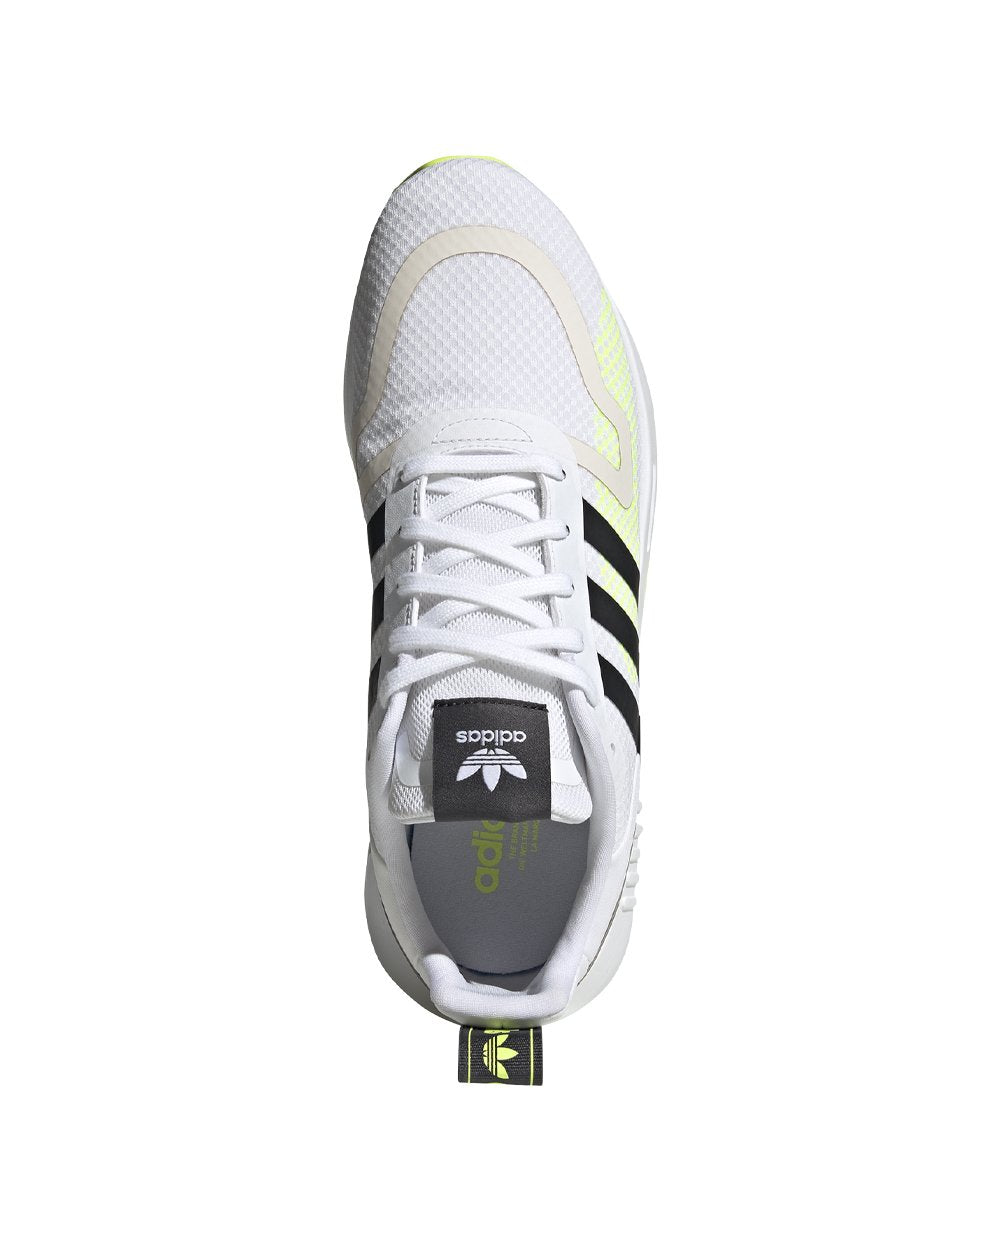 Adidas Multix White with Beige and Yellow